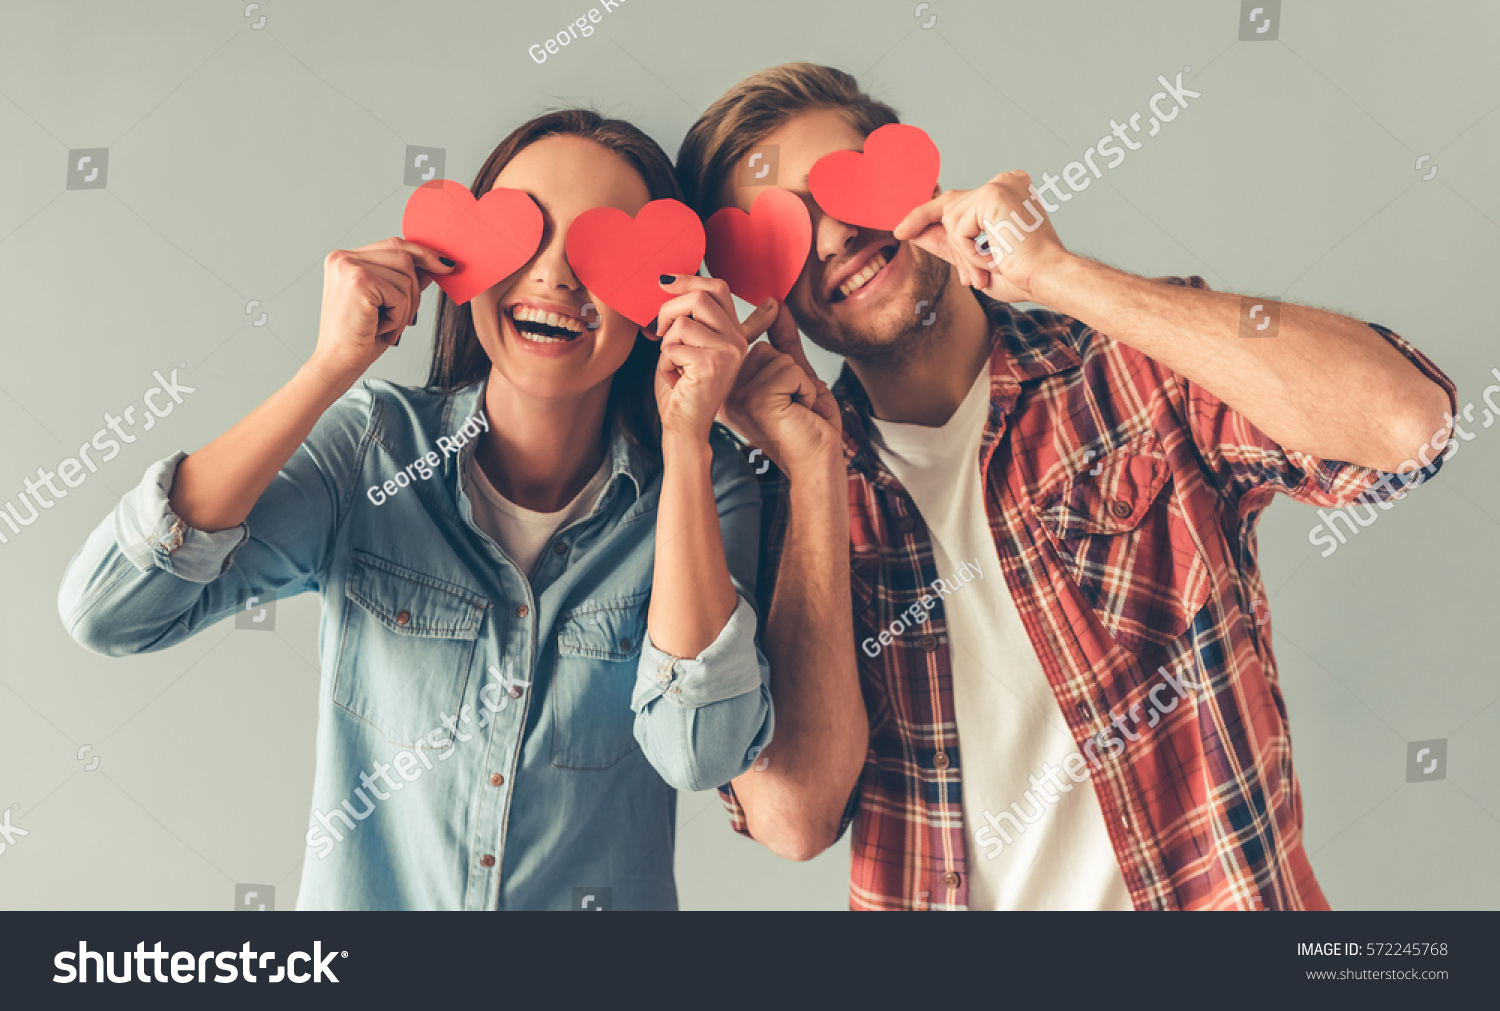 Happy young couple is holding red paper hearts and smiling, on gray background #572245768